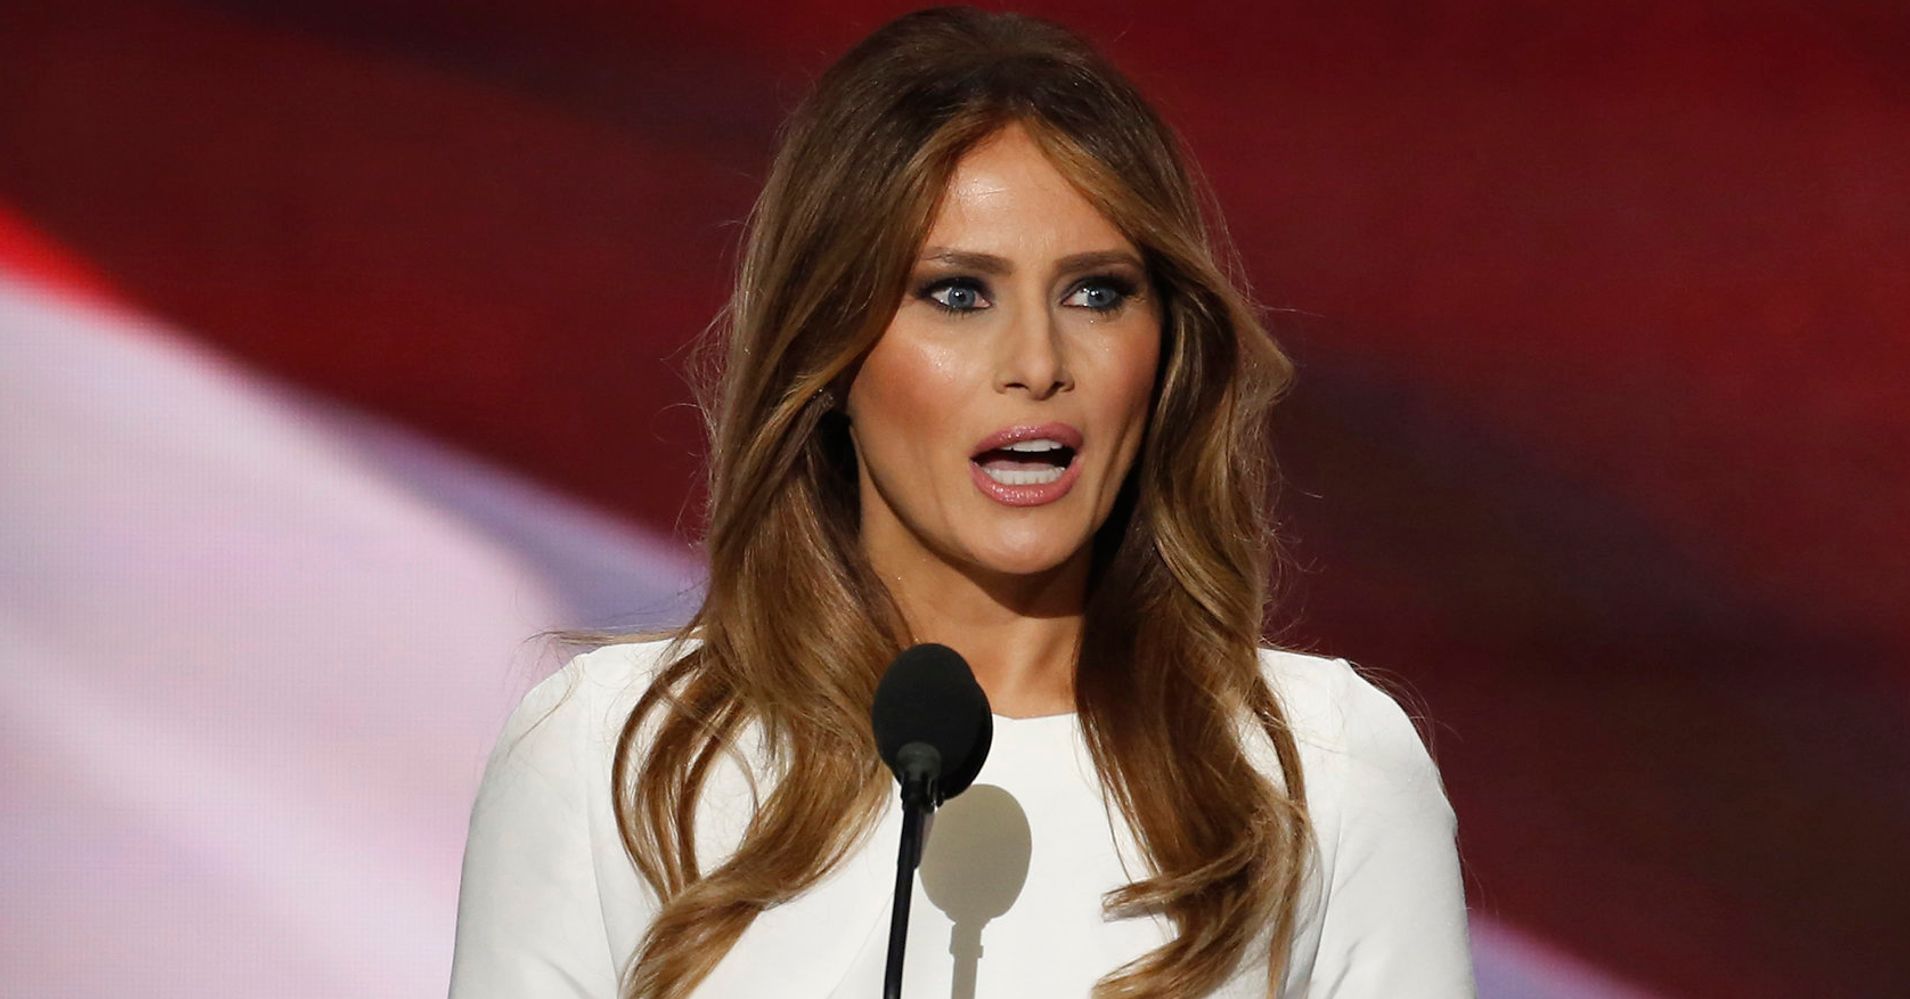 Melania Trump Speech Appears To Be An Illegal Campaign Contribution